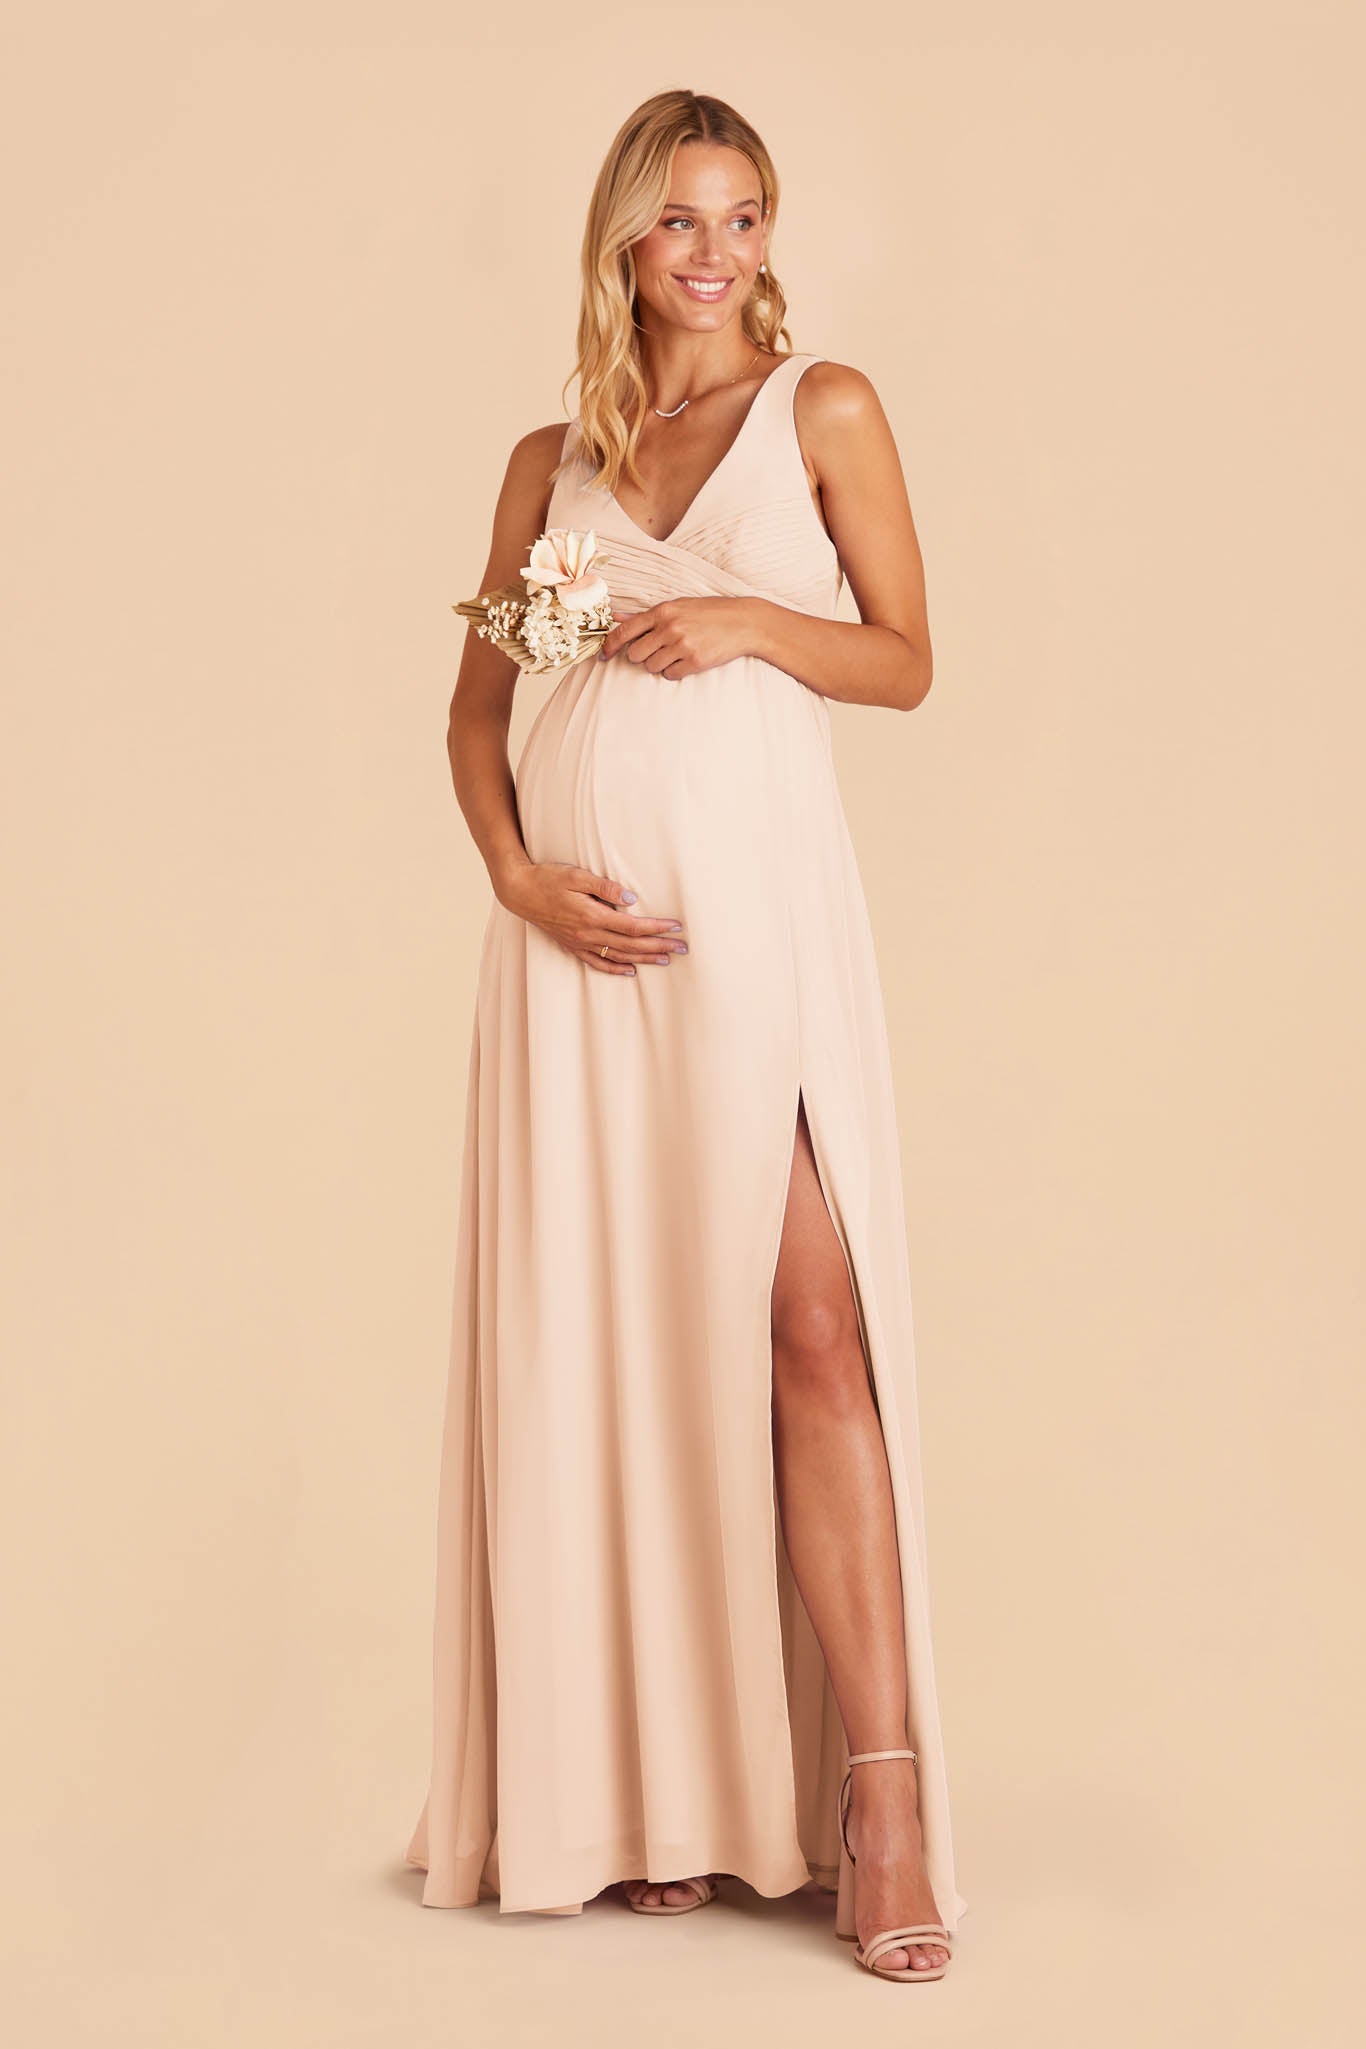 Champagne Laurie Empire Dress by Birdy Grey